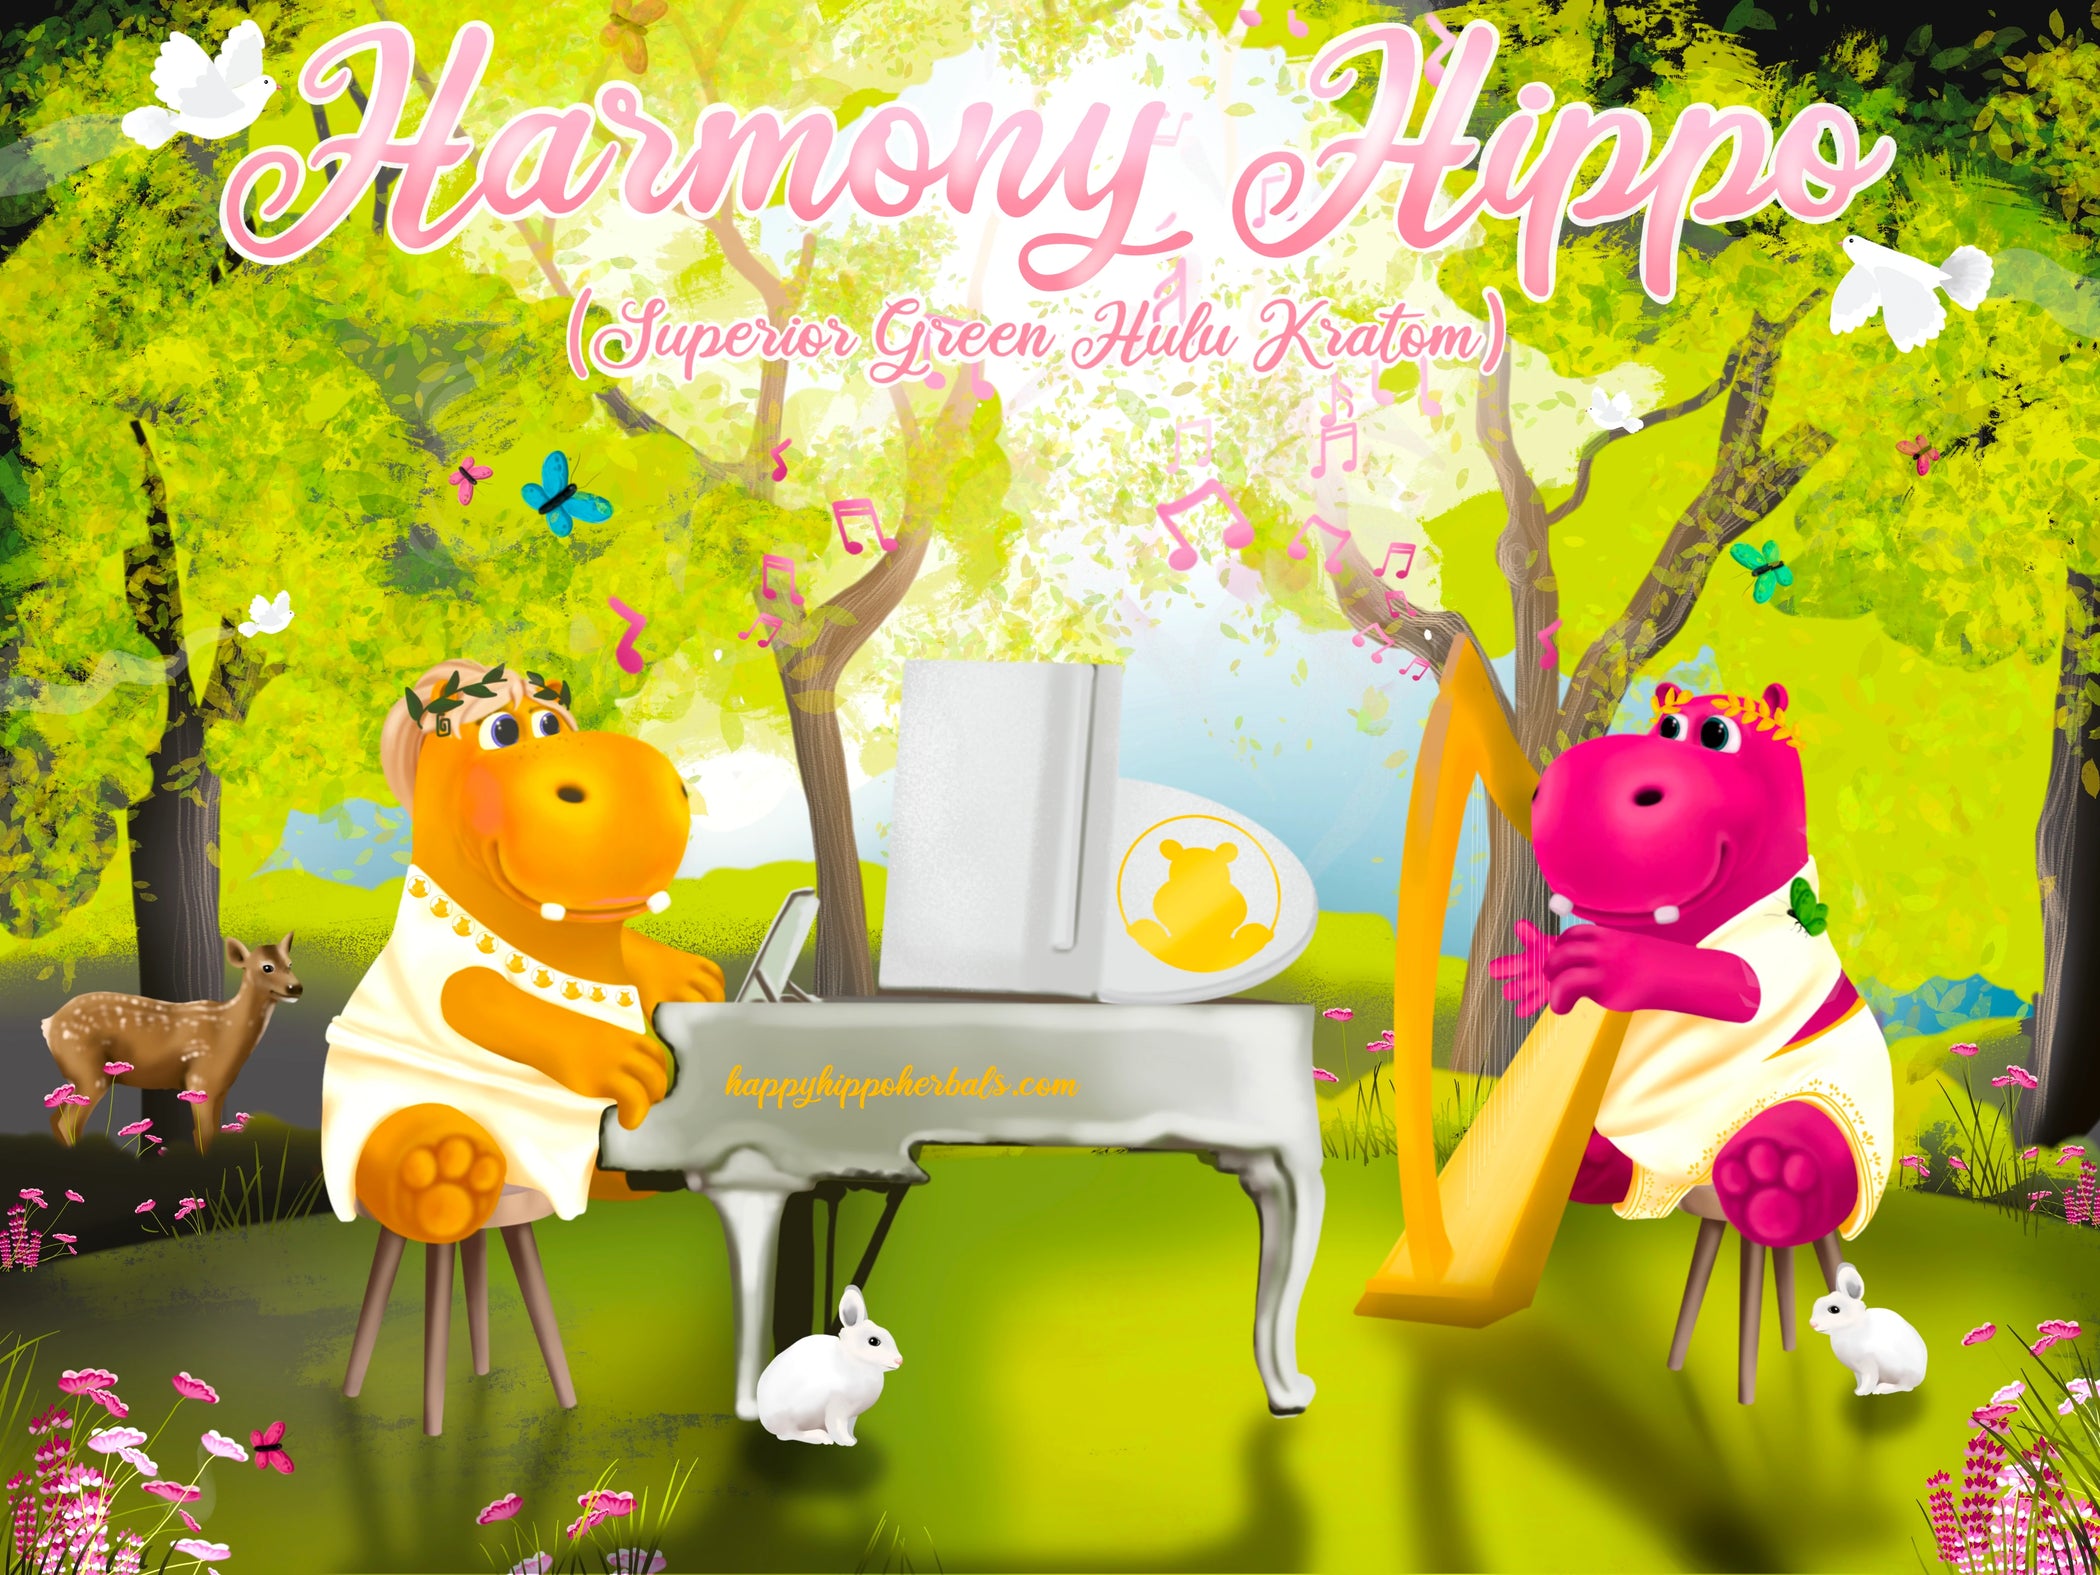 Graphic Designed image depicting Puddles the Hippo playing harmonious music with a friend while using Green Hulu Kratom Powder (Harmony Hippo), and feeling the effects of a happy mind and relief from physical discomfort